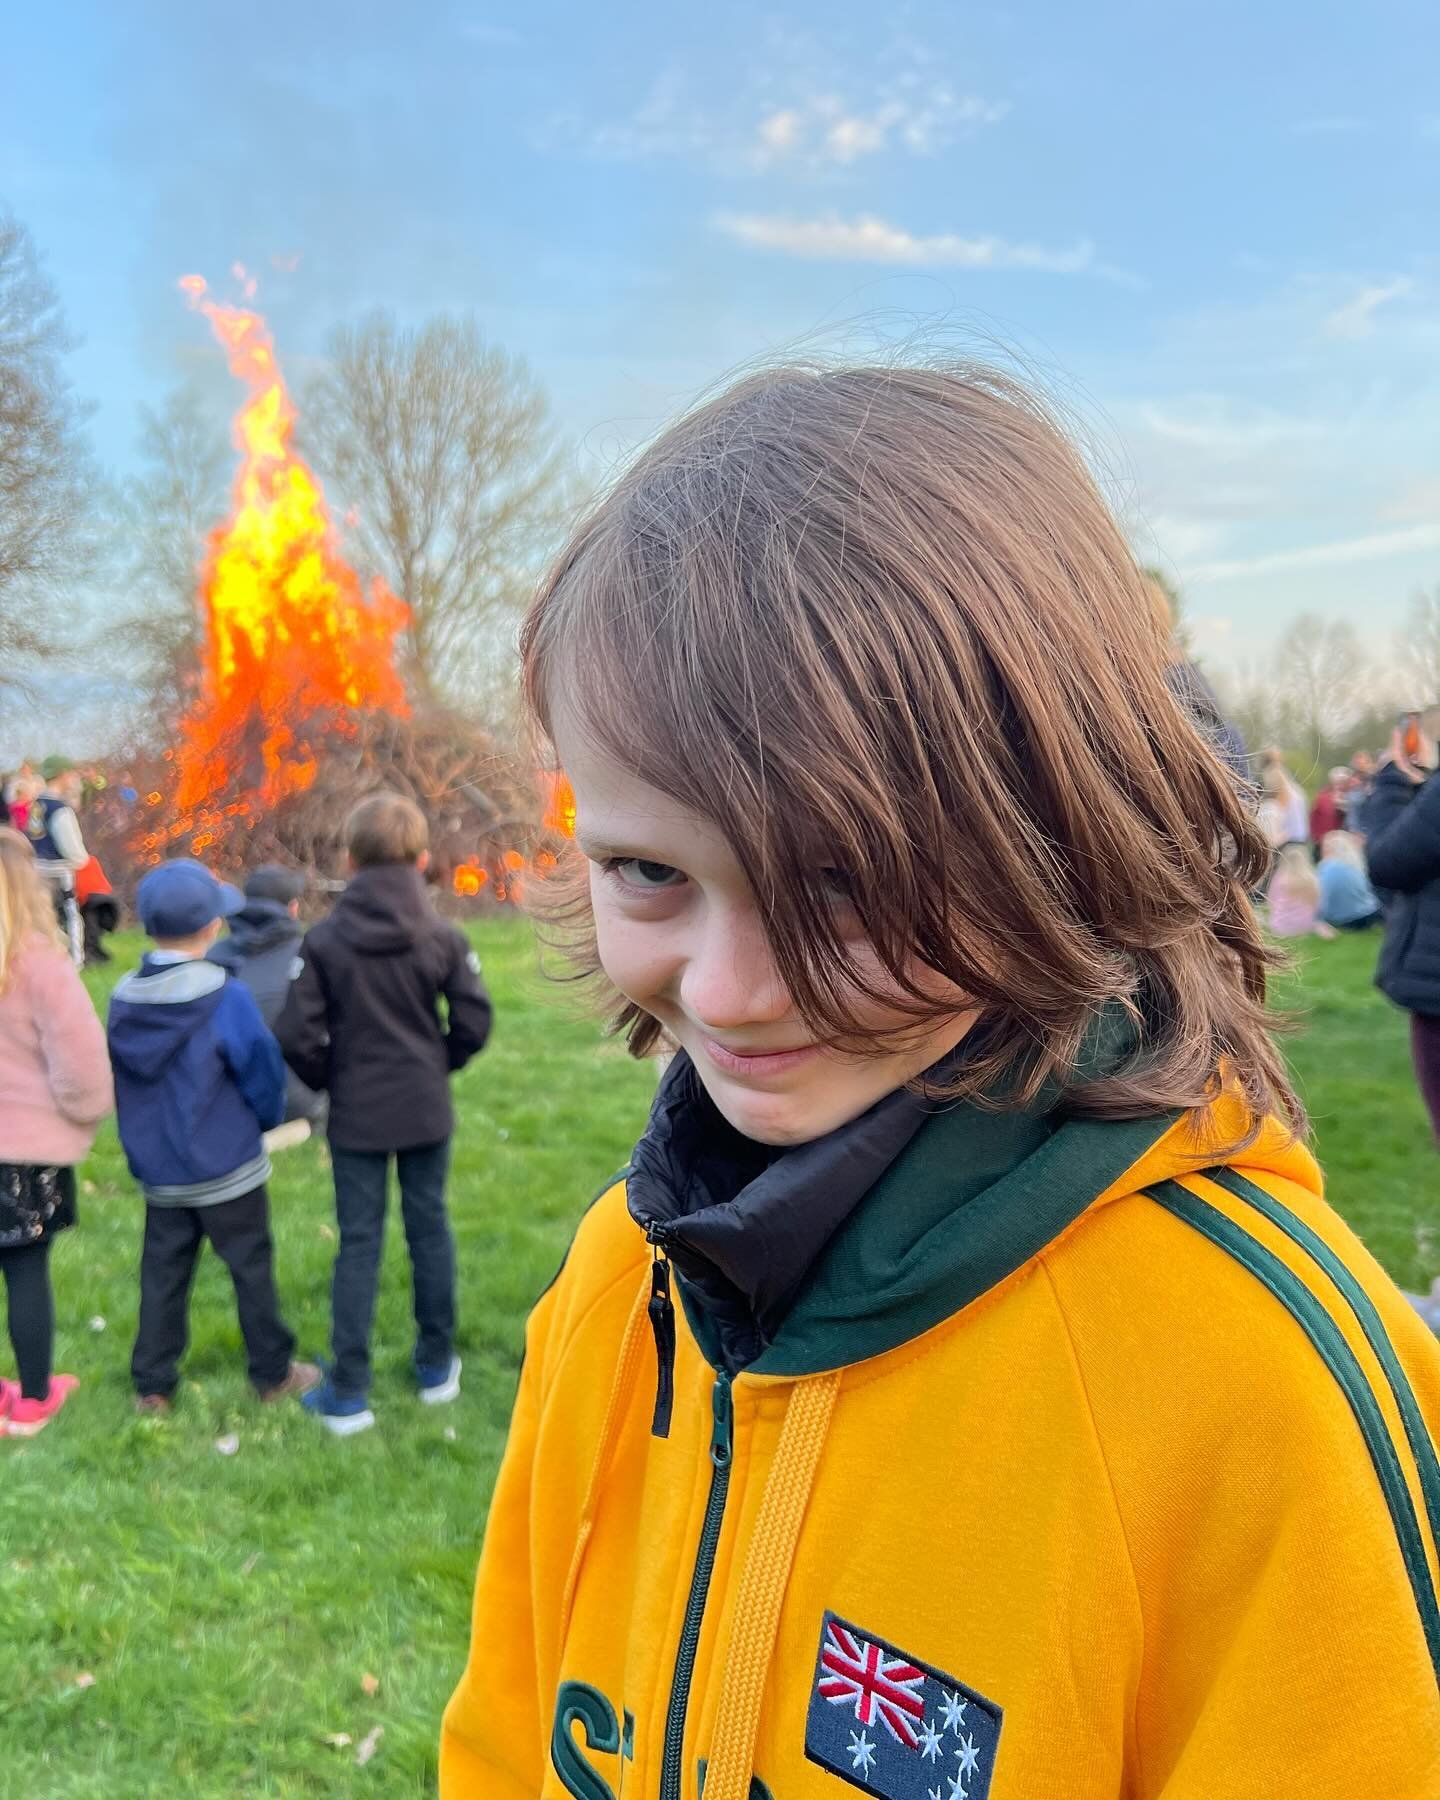 Made it home tonight for the Valborg bonfire. Spring is here! And fire is so mesmerizing. 

#disasterboy #valborg #bonfire